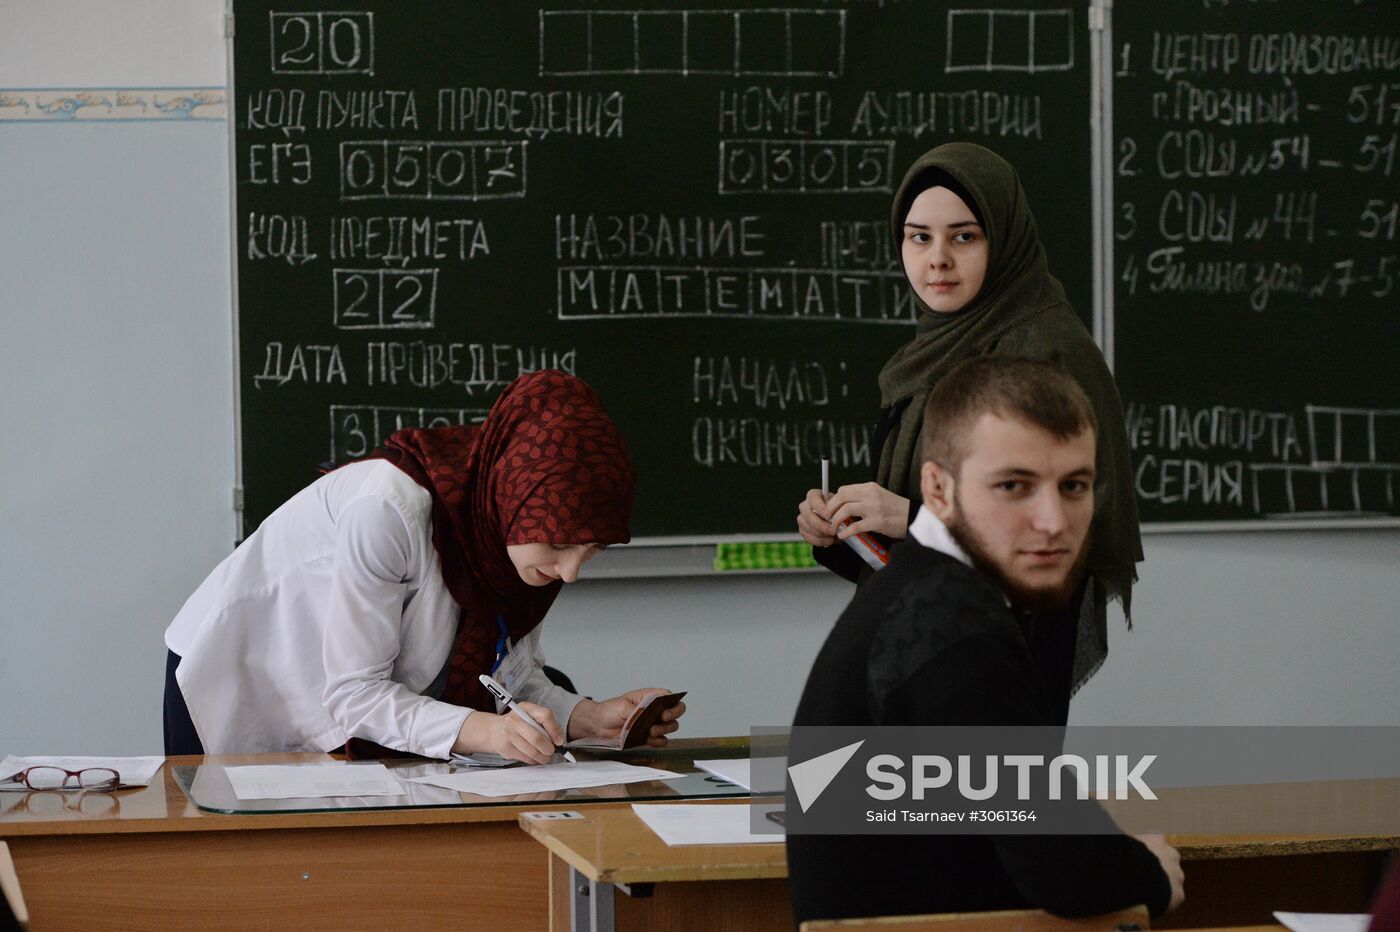 Early Unified State Examinations in Math begin in Russia